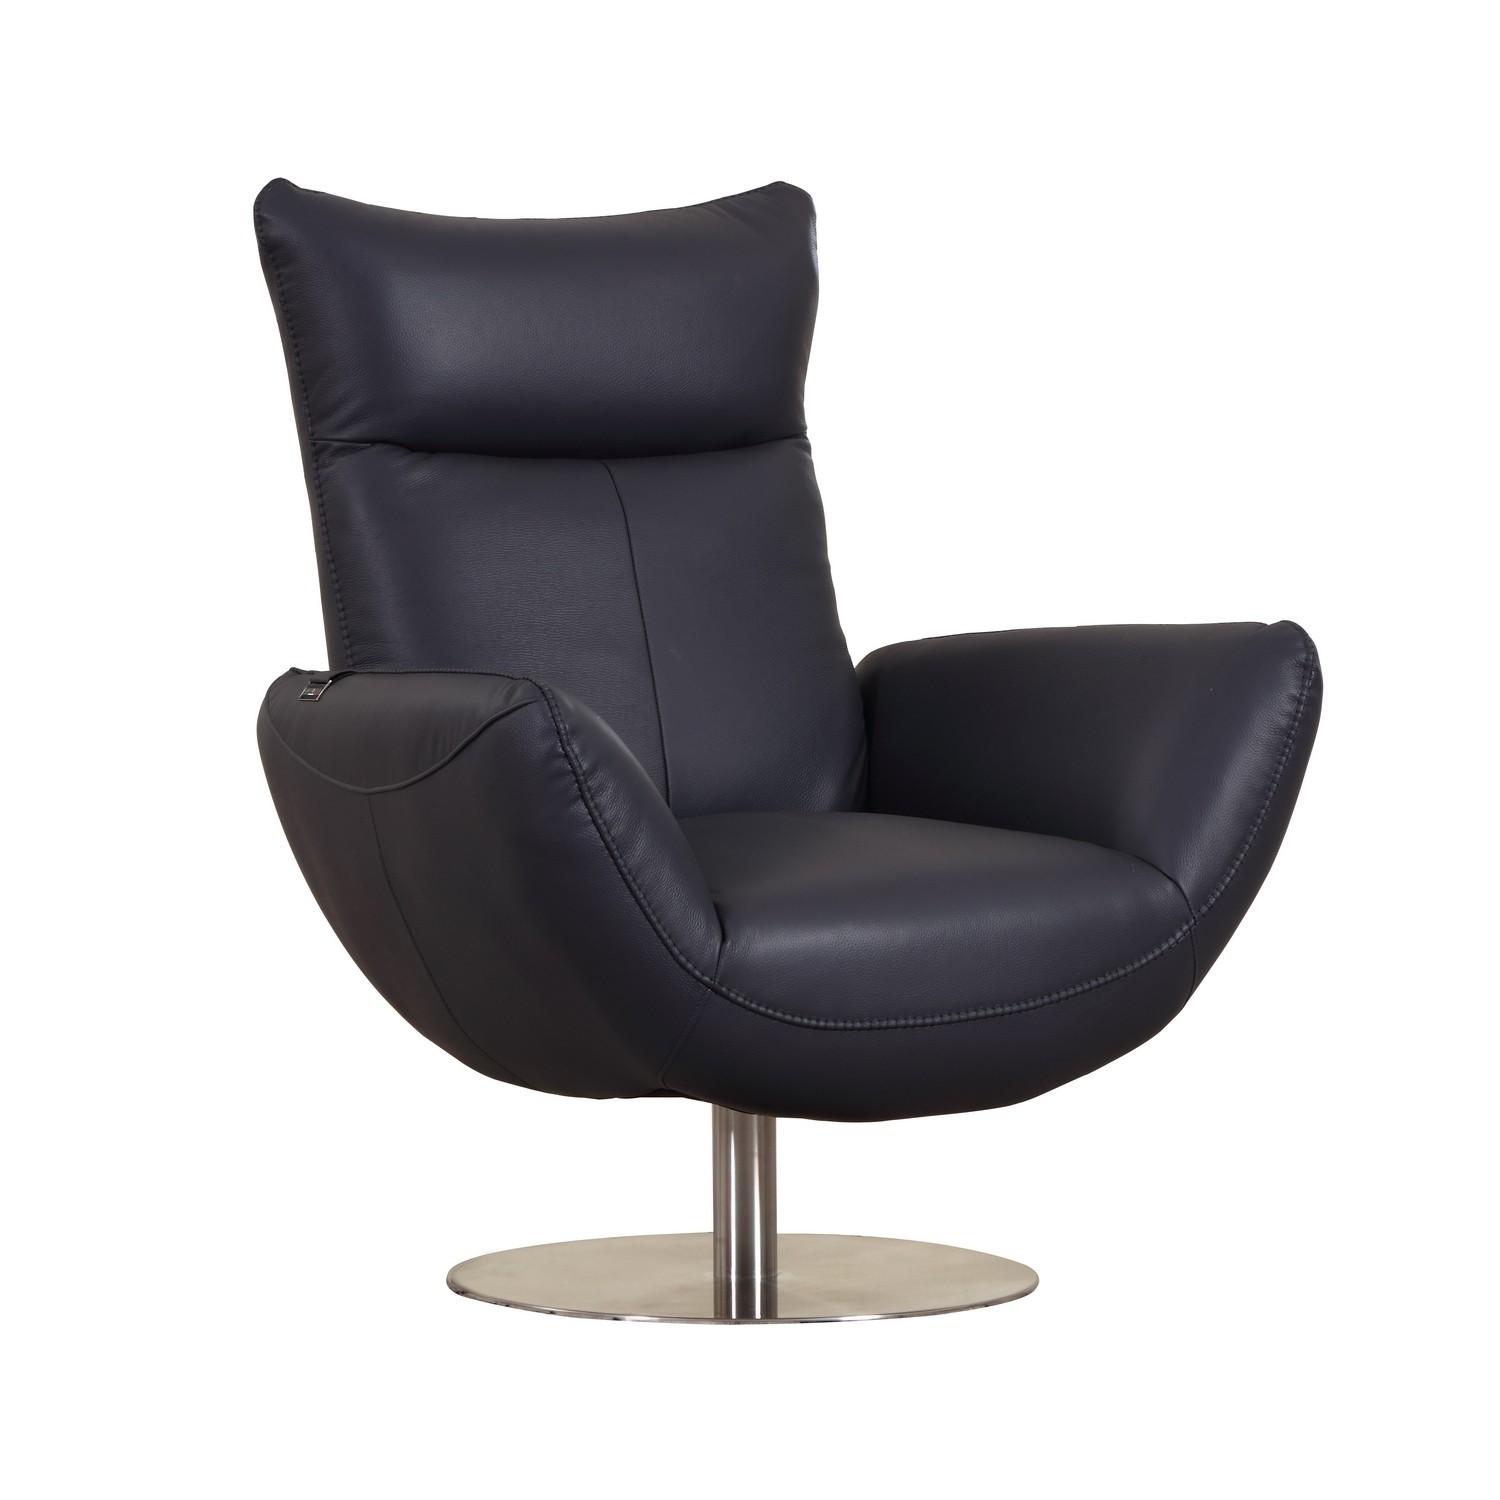 Contemporary Lounge Chair Jesse 624-NAV in Navy Italian Leather